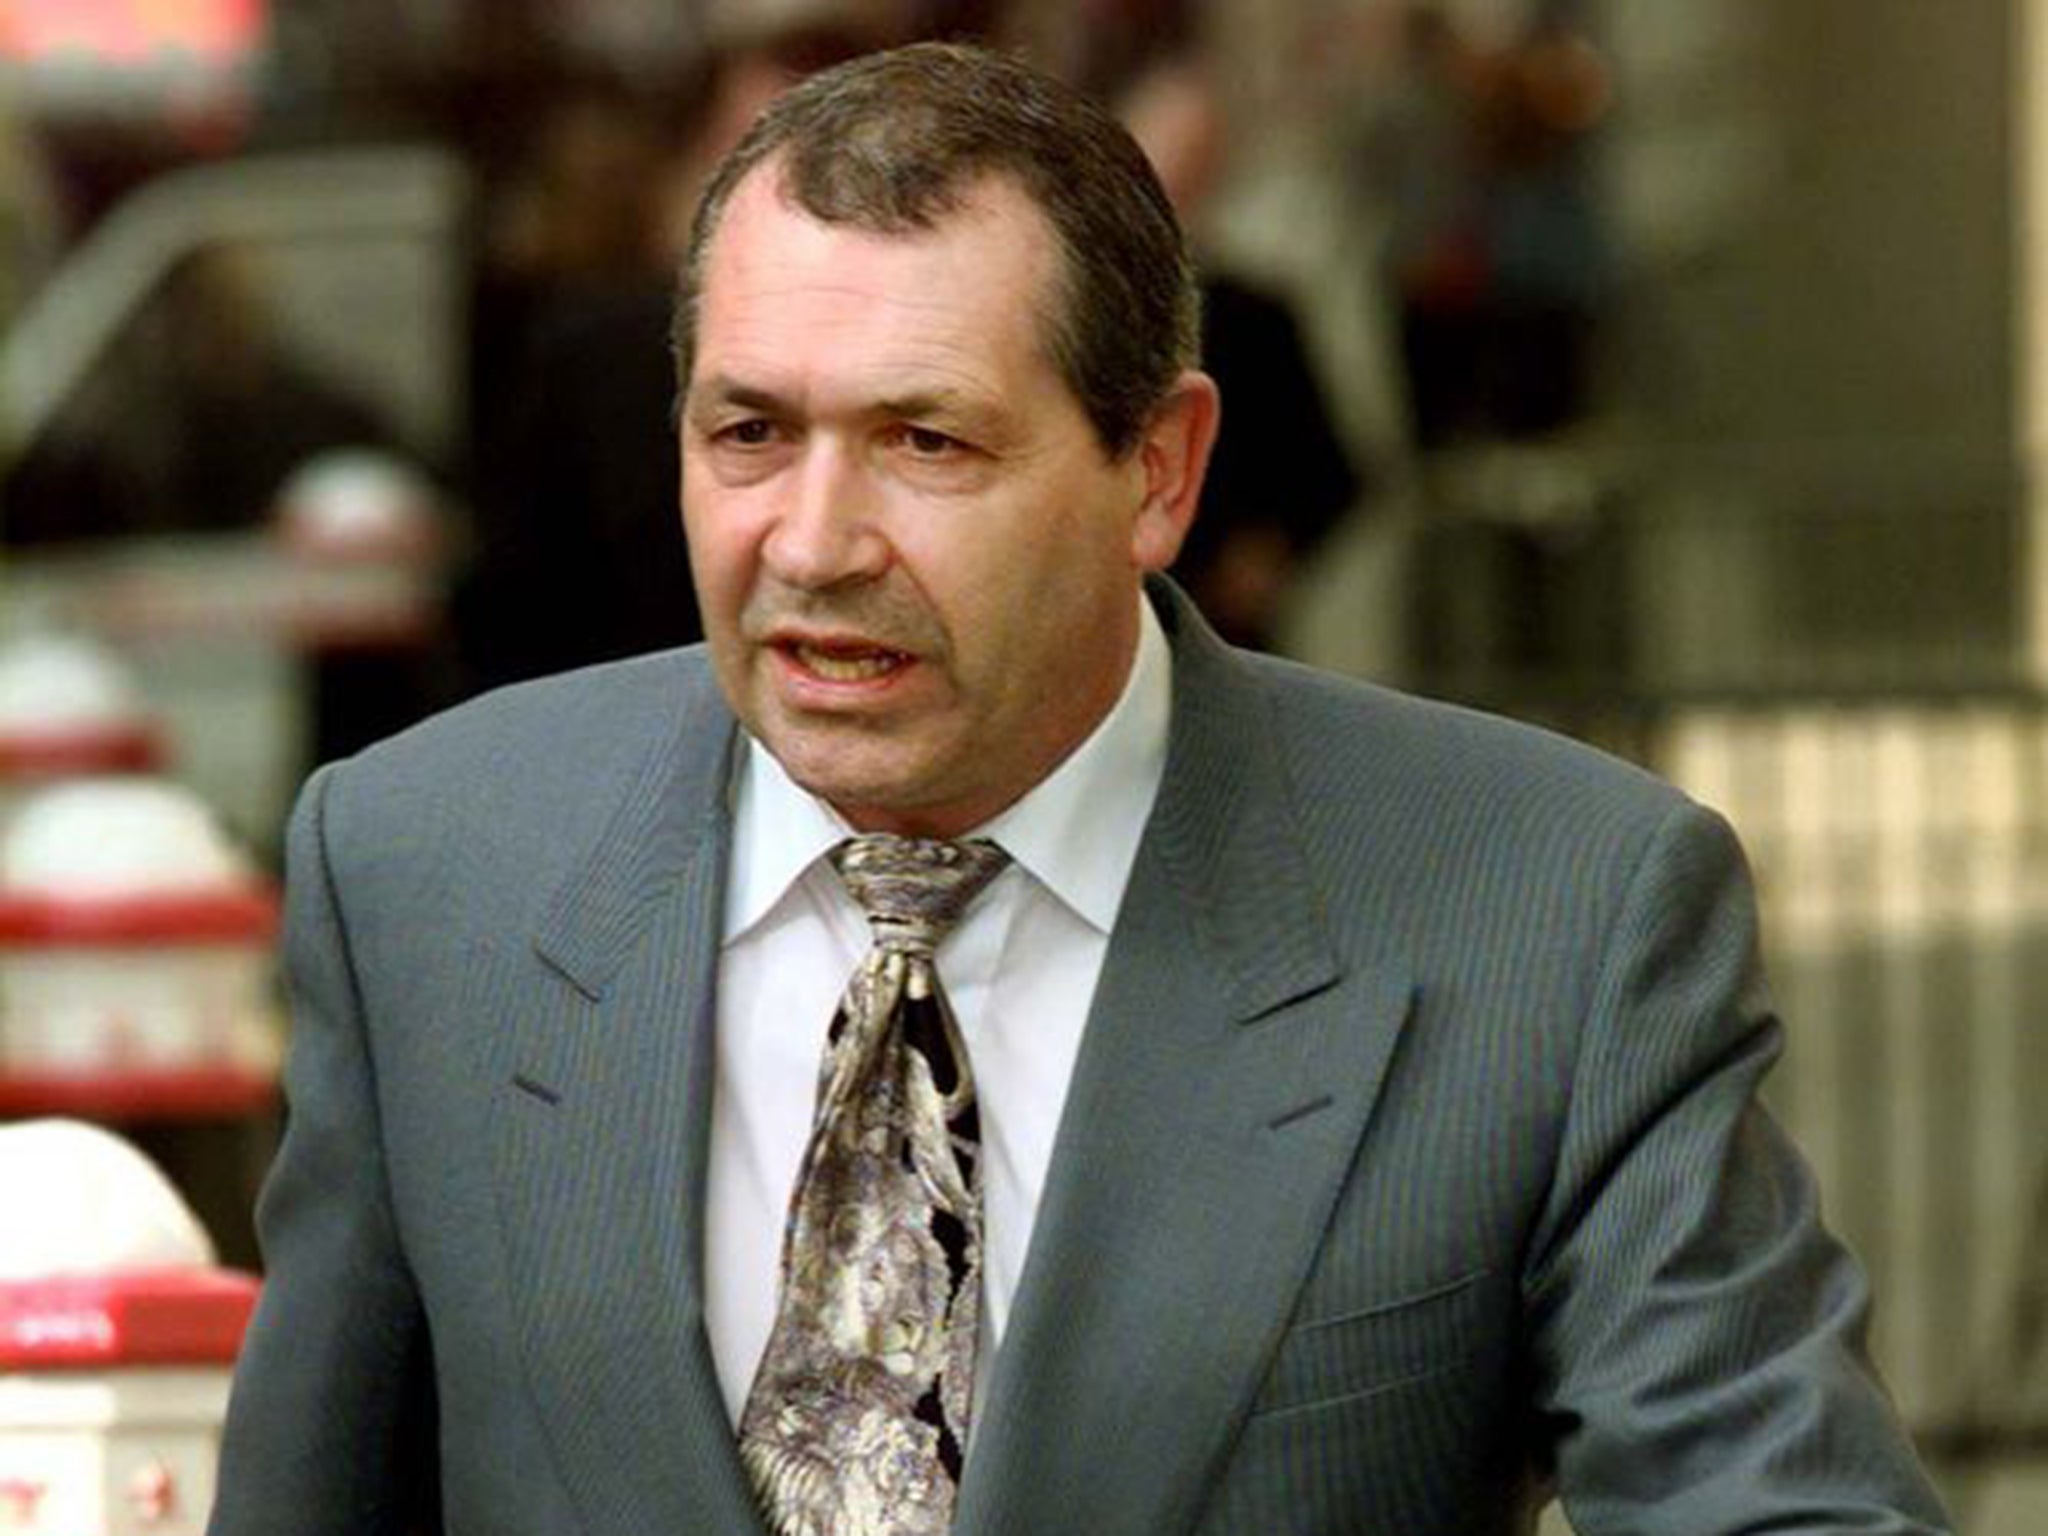 John ‘Goldfinger’ Palmer (pictured in 2001) was shot dead at his secluded home in Brentwood, Essex